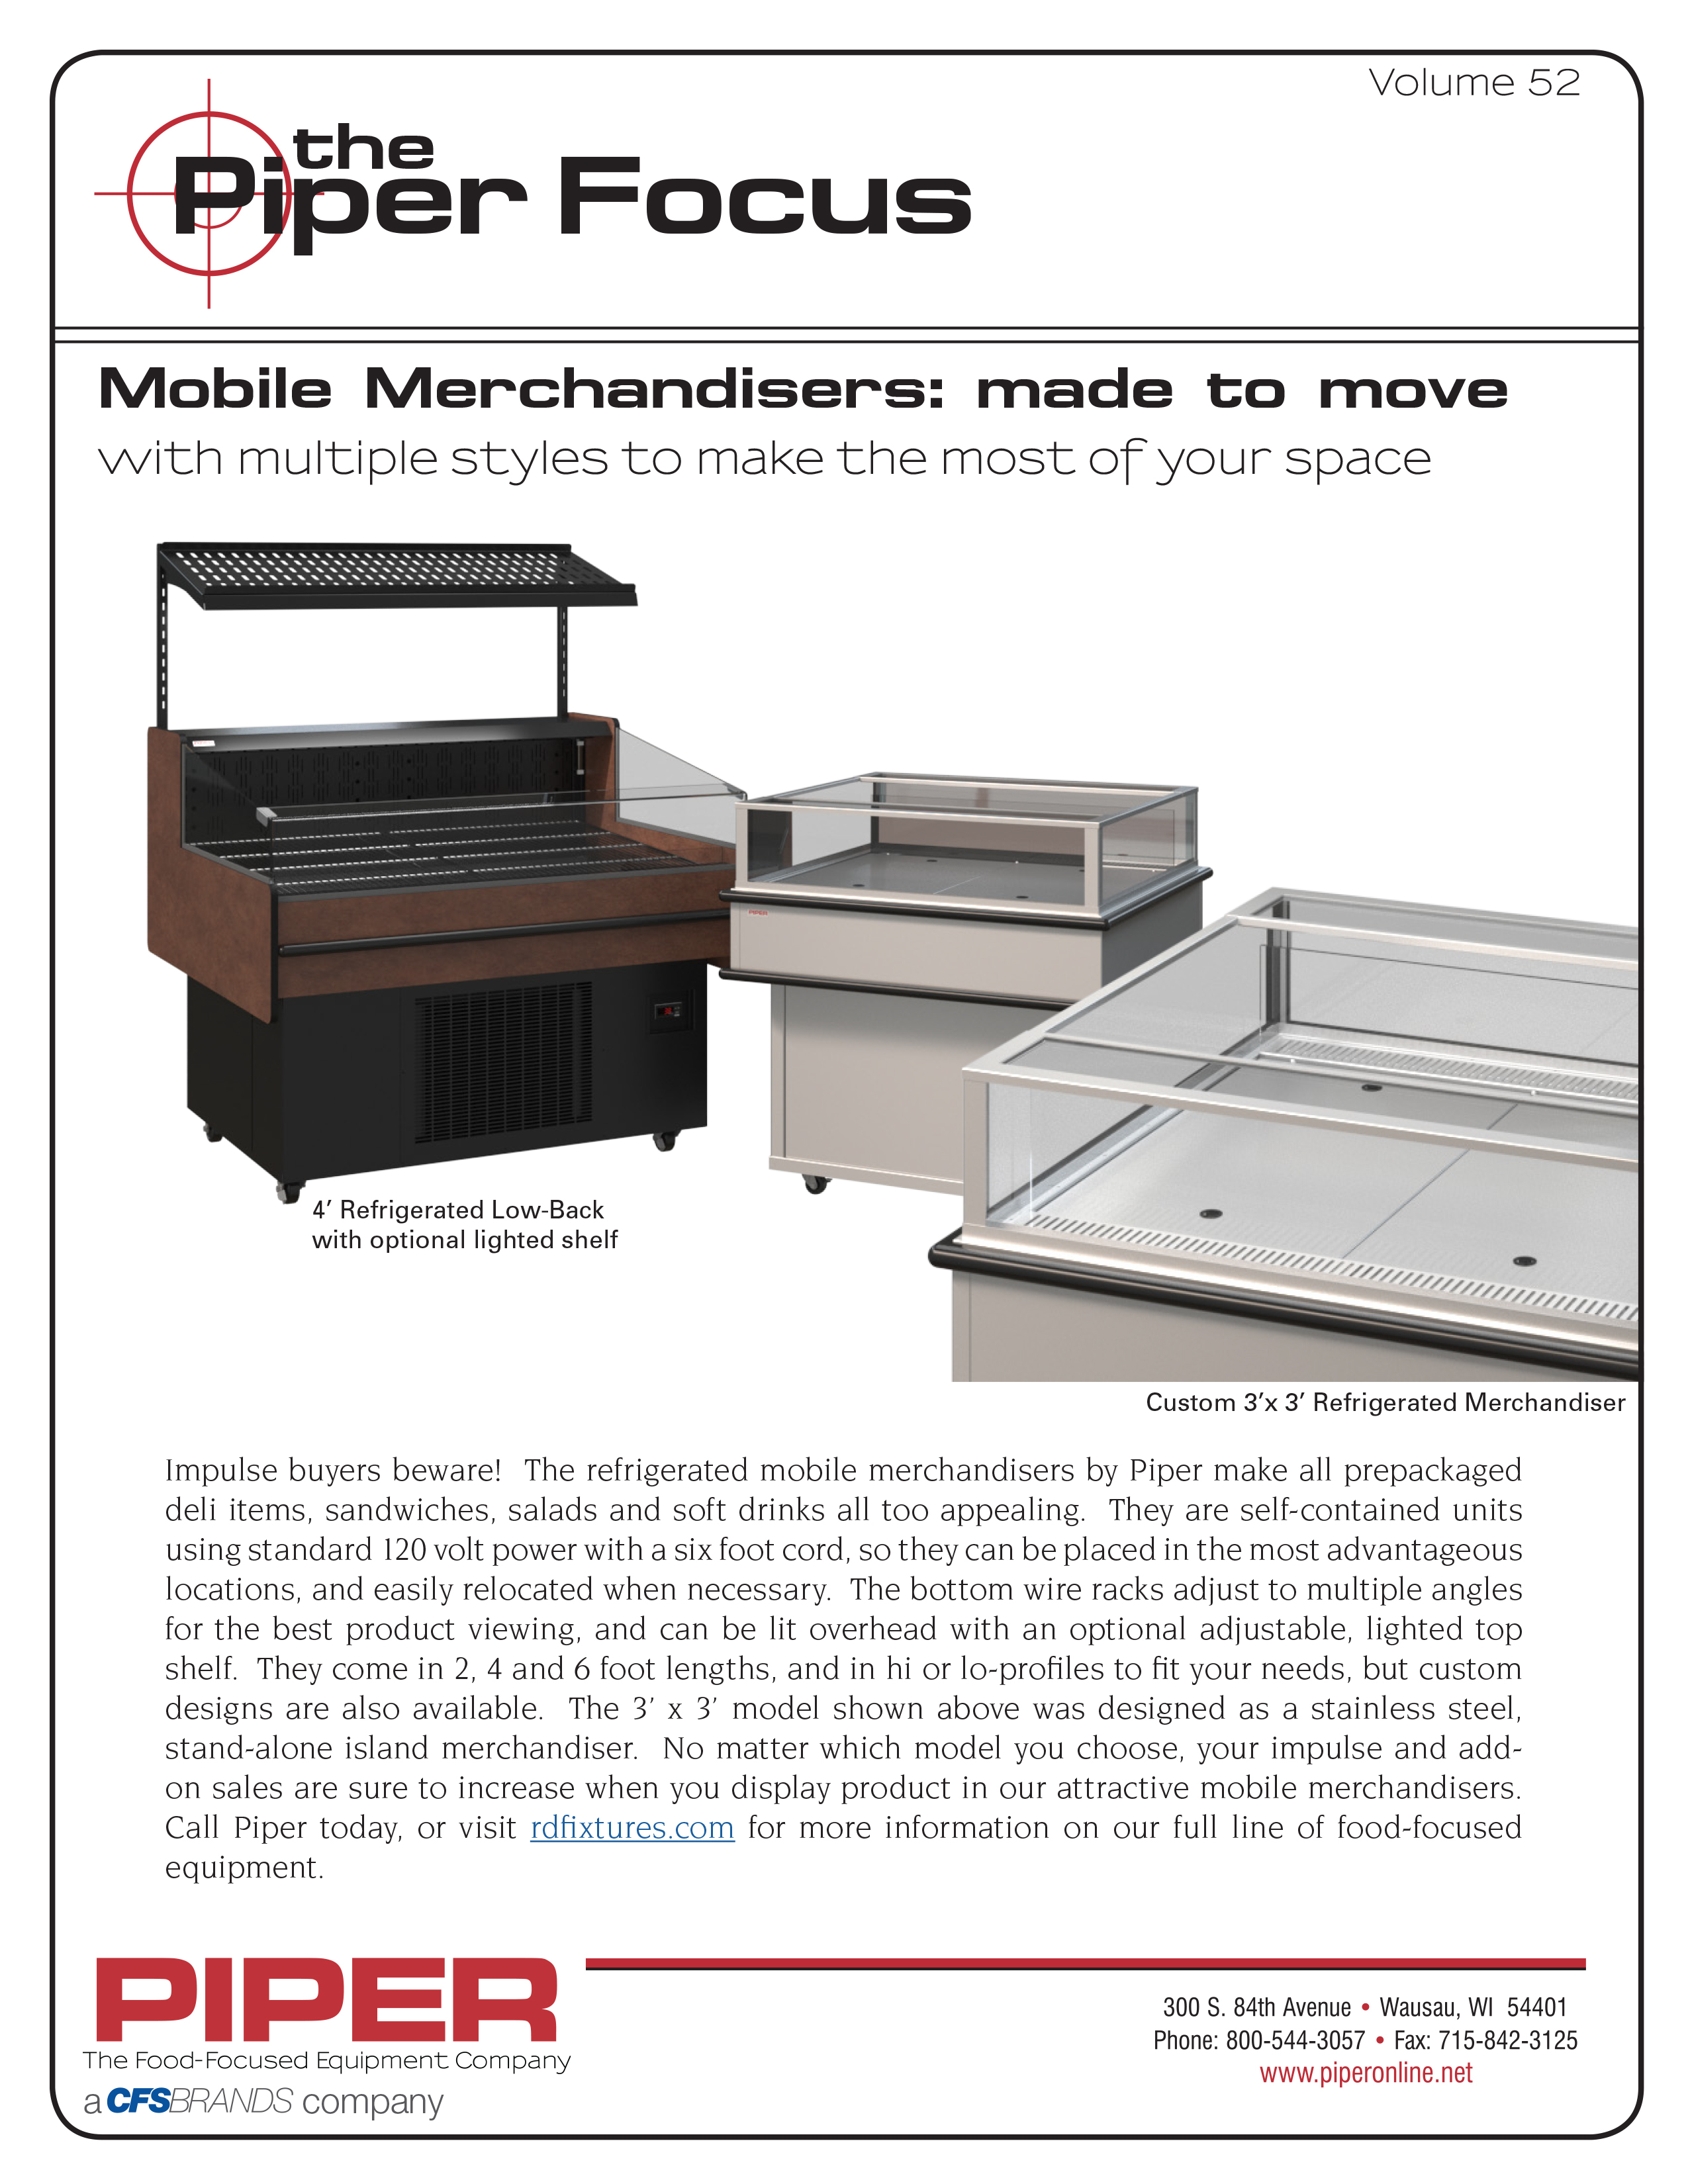 Piper Focus Mobile Merchandisers: Made to Move